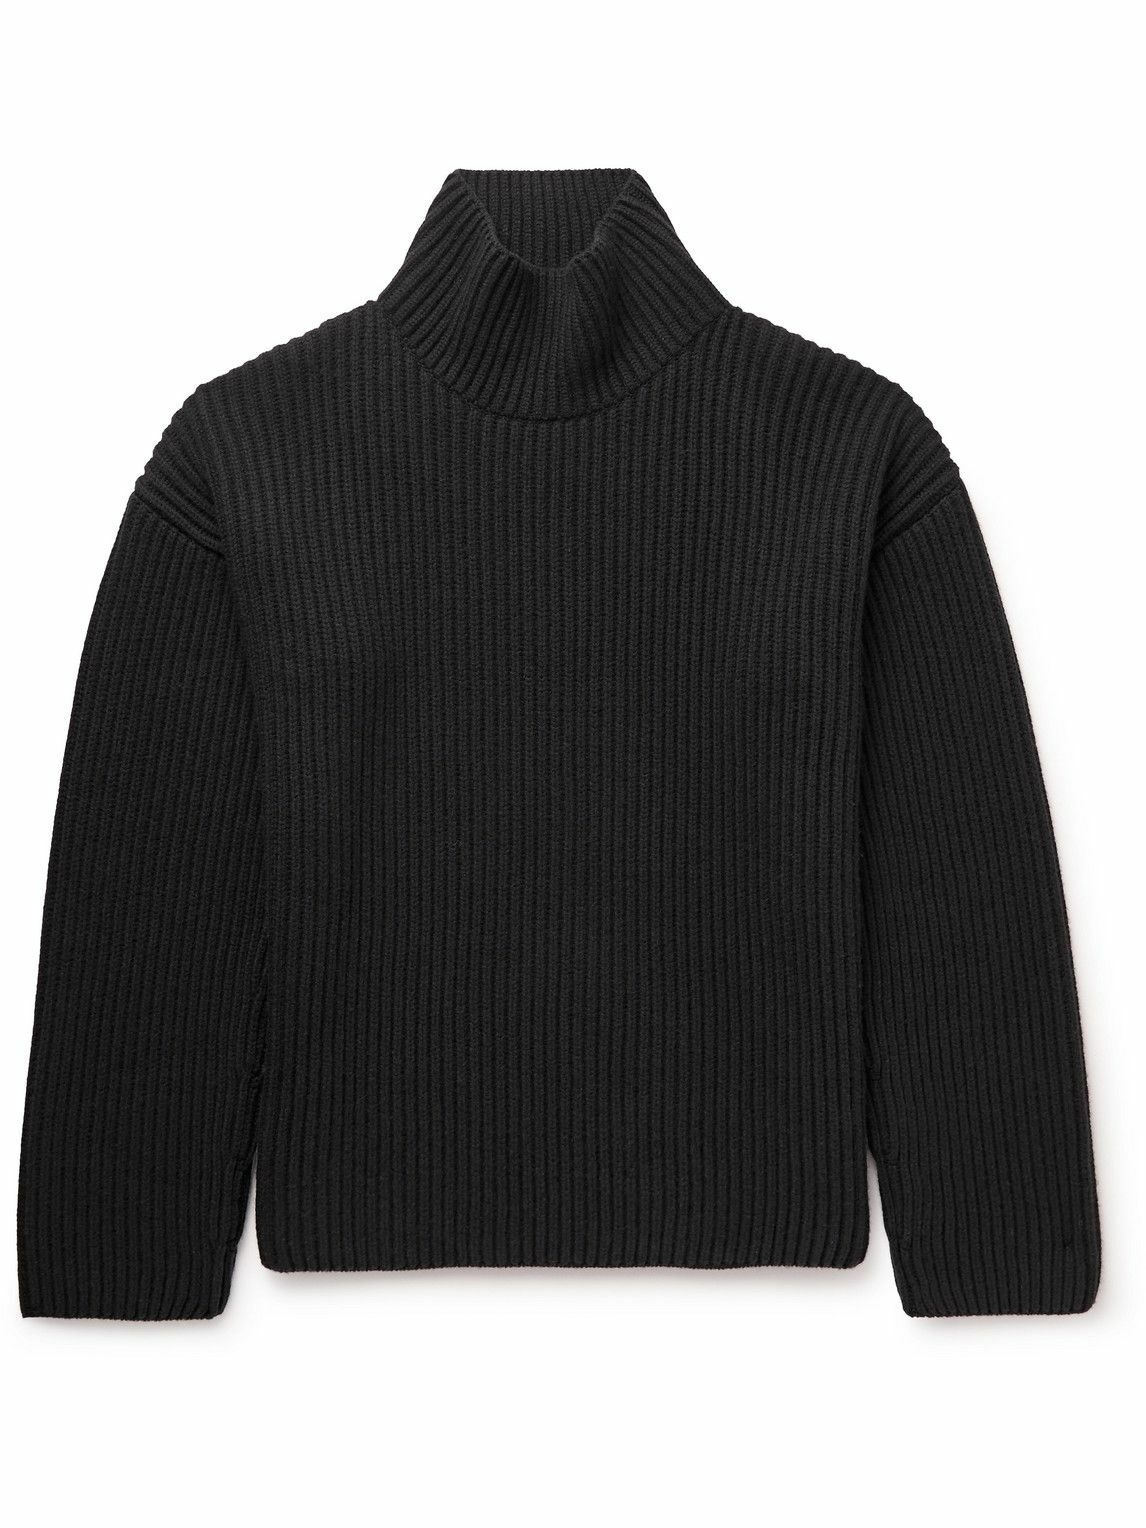 The Row - Manlio Ribbed Cashmere Rollneck Sweater - Black The Row